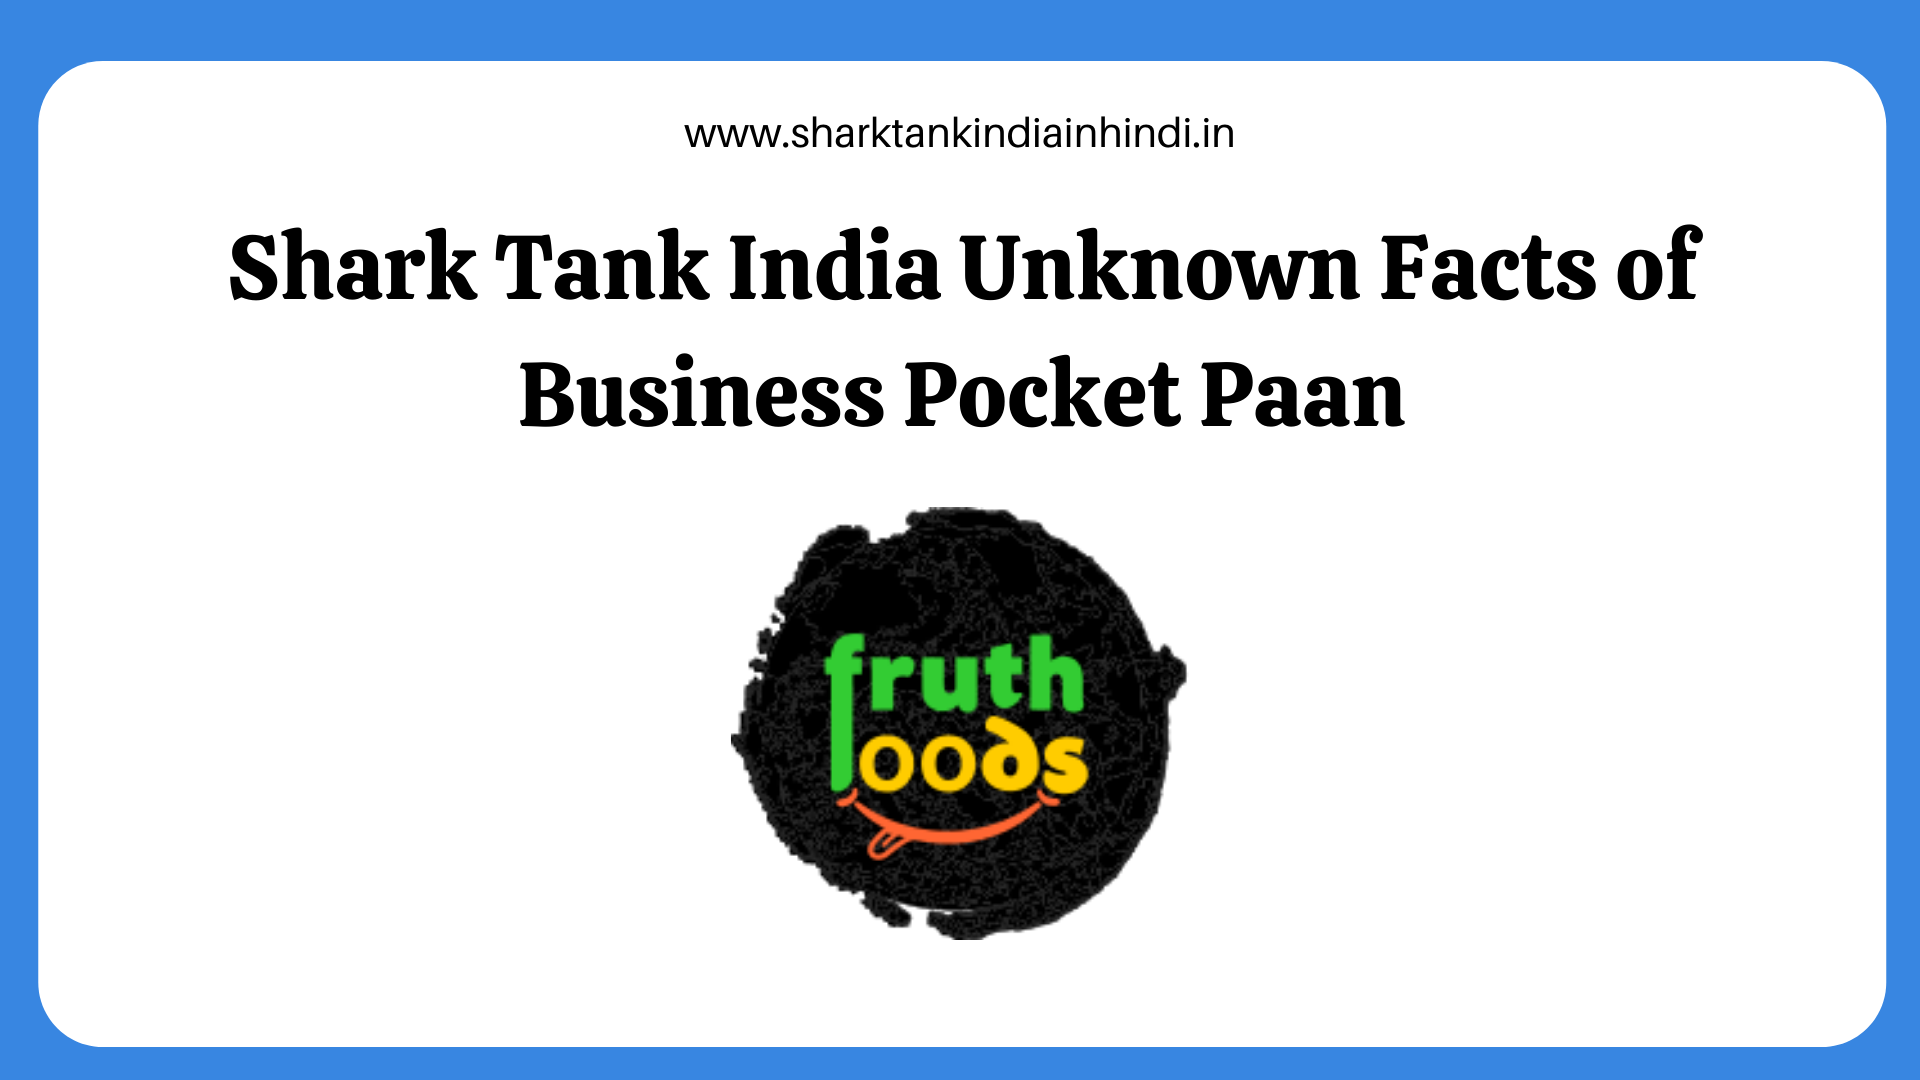 Shark Tank India Unknown Facts of Business Pocket Paan